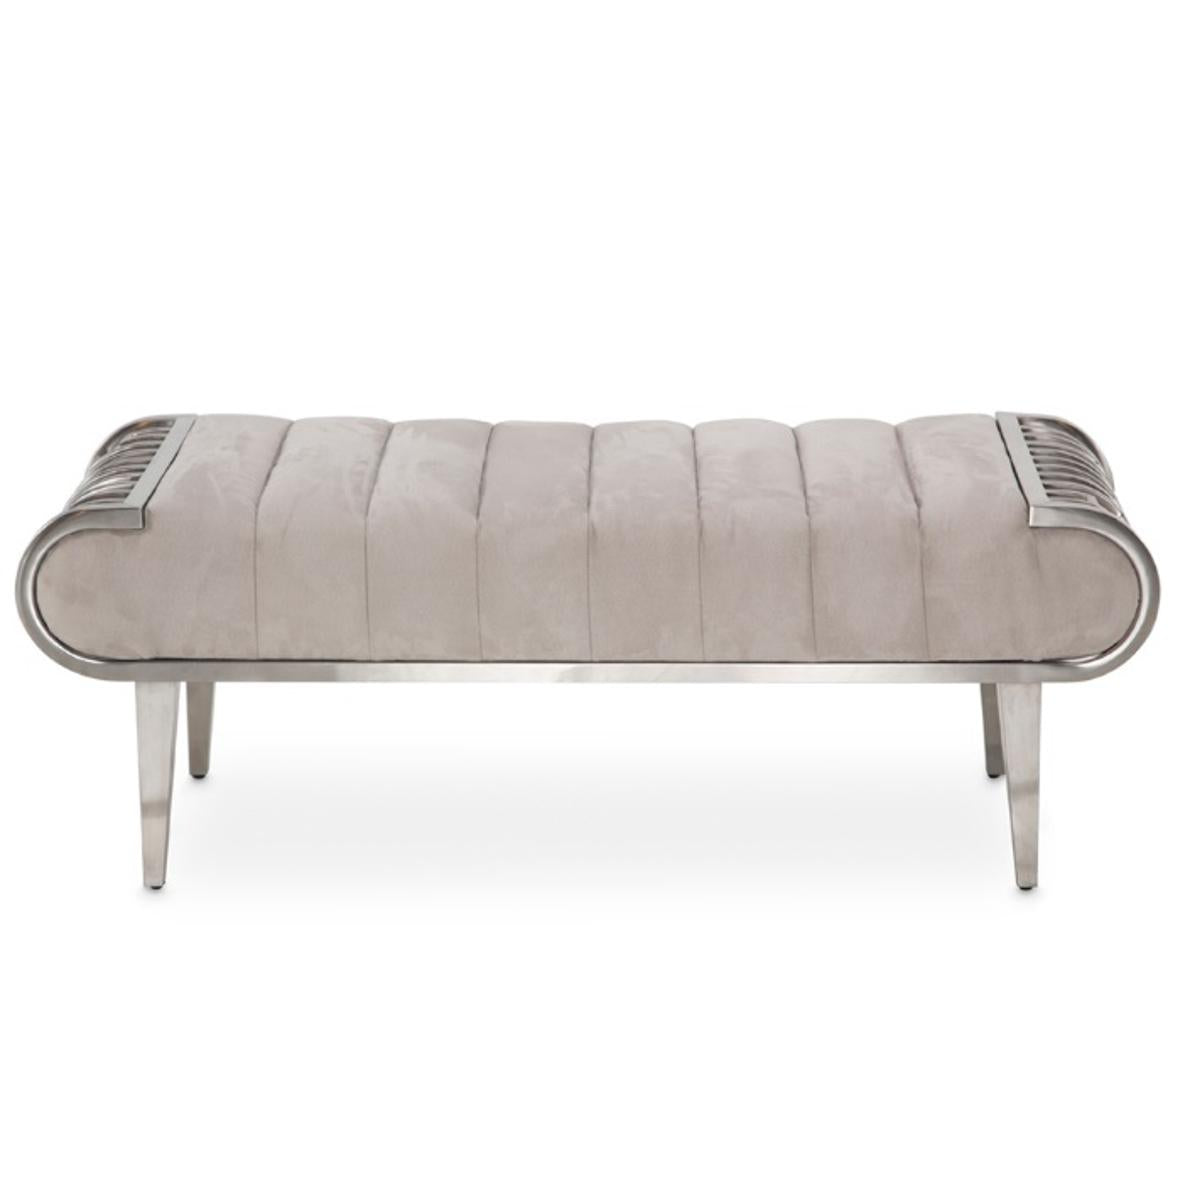 Roxbury Park Channel Tufted Bed Bench in Stainless Steel